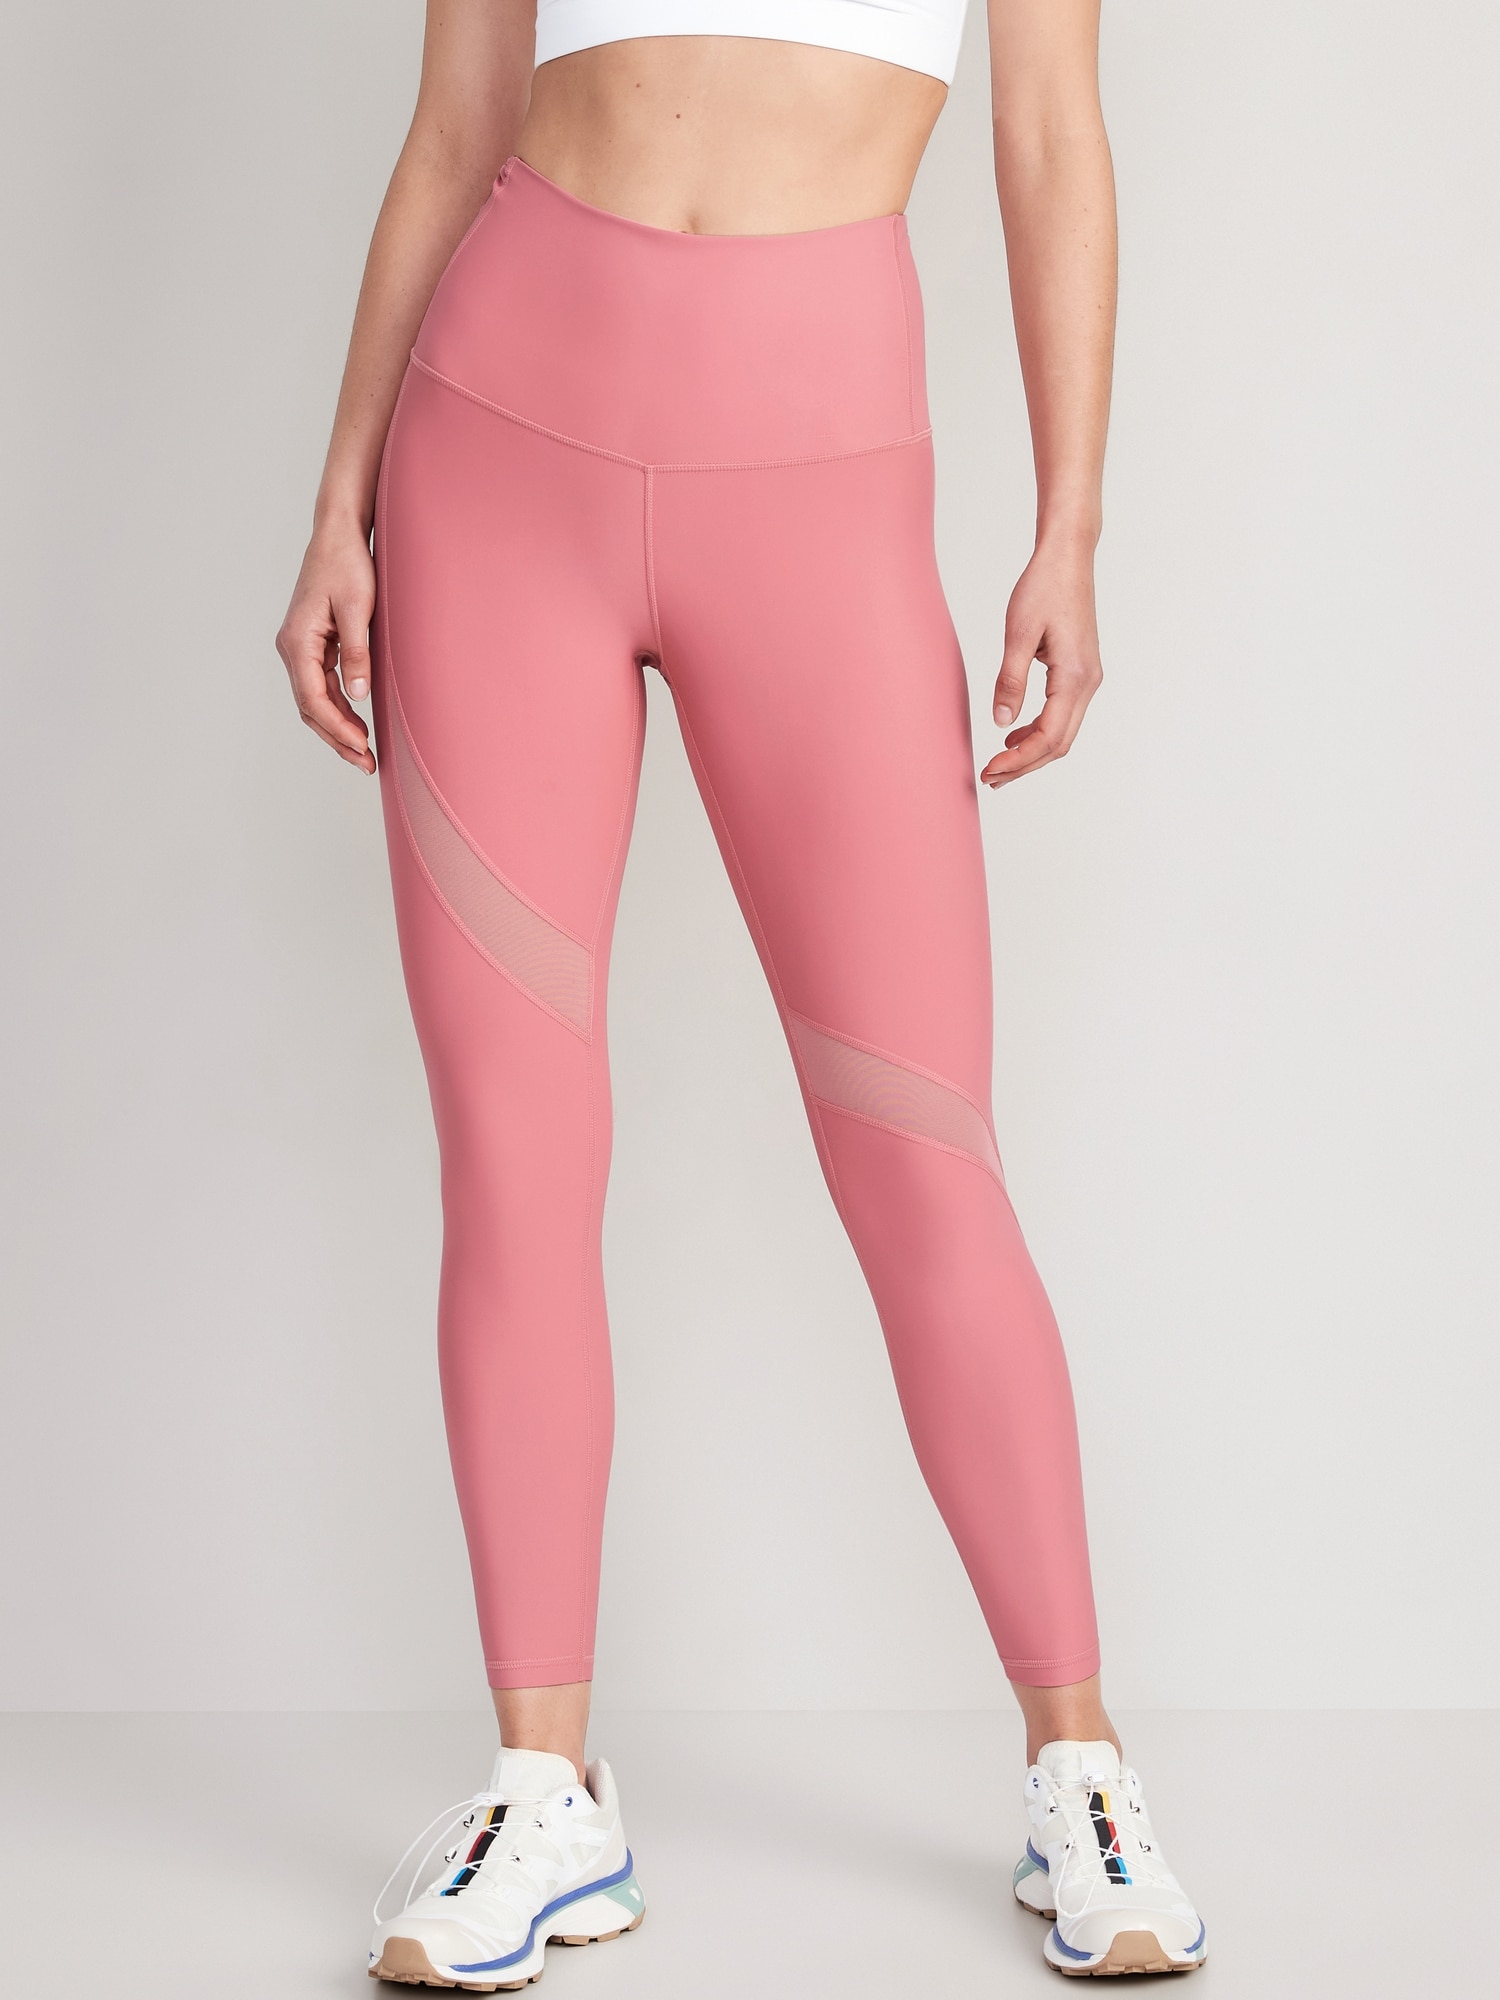 Old Navy Extra High-Waisted PowerSoft Mesh-Paneled 7/8-Length Leggings for Women pink. 1